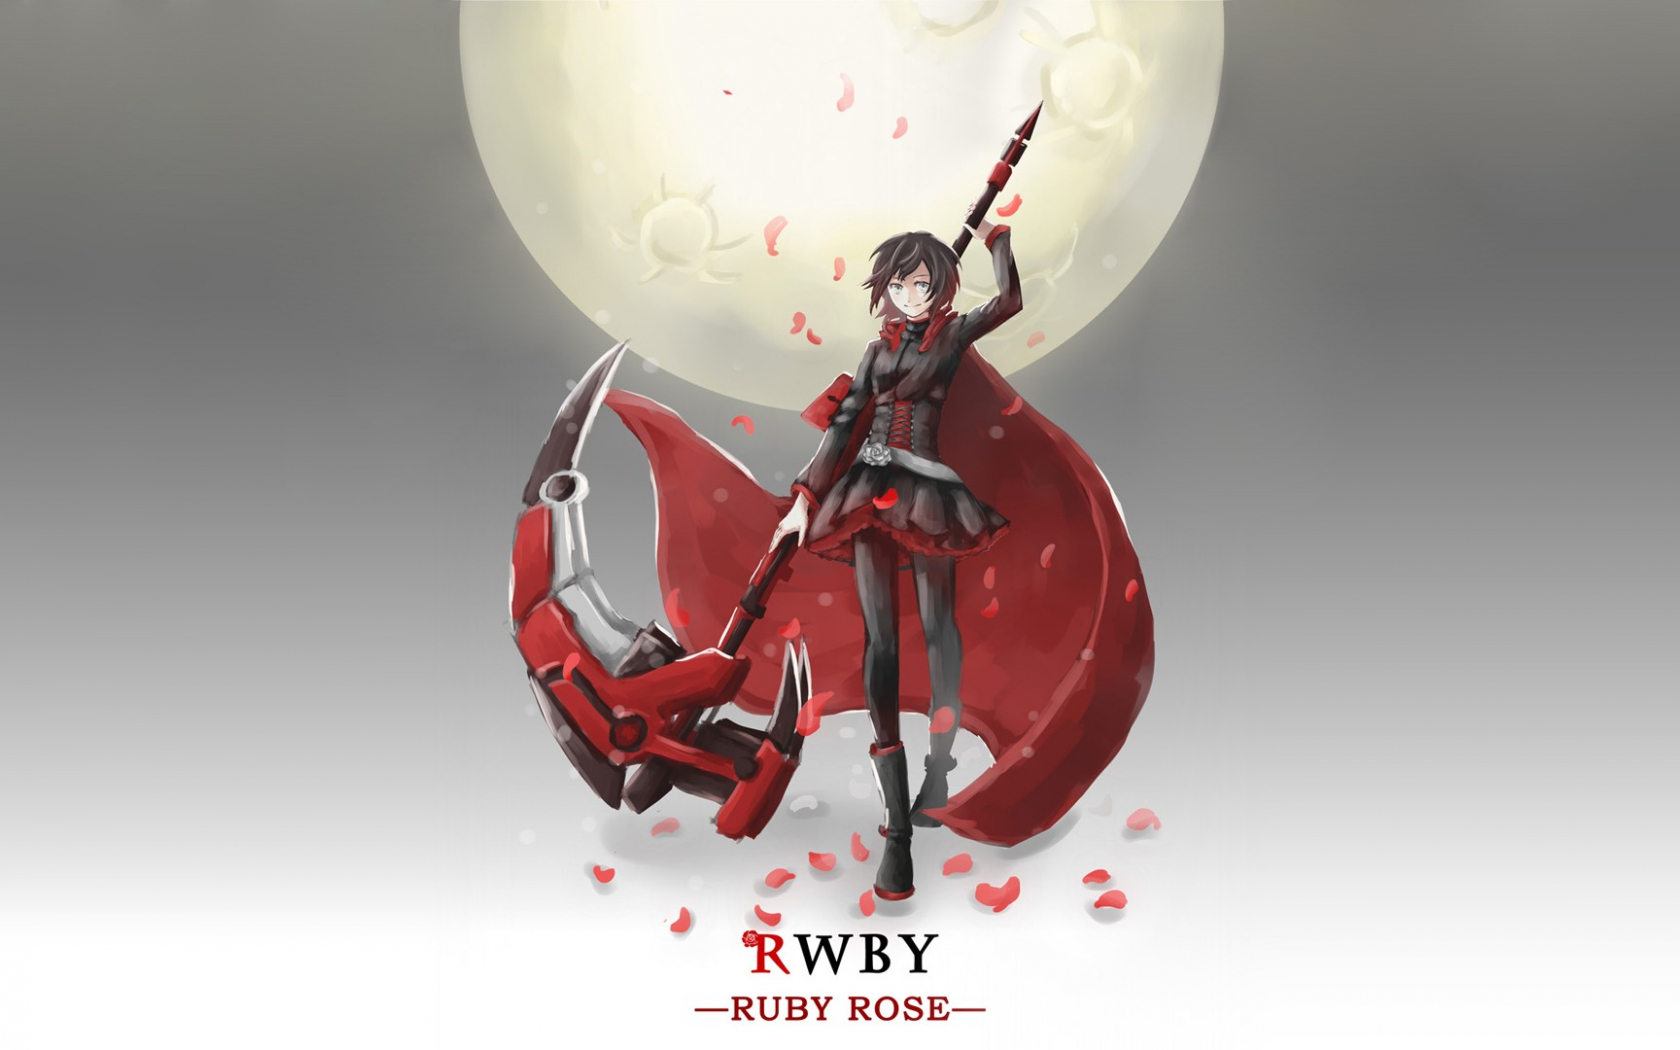 Desktop Wallpaper Beautiful Ruby Rose Anime Girl Rwby Hd Image Picture Background 11c56d